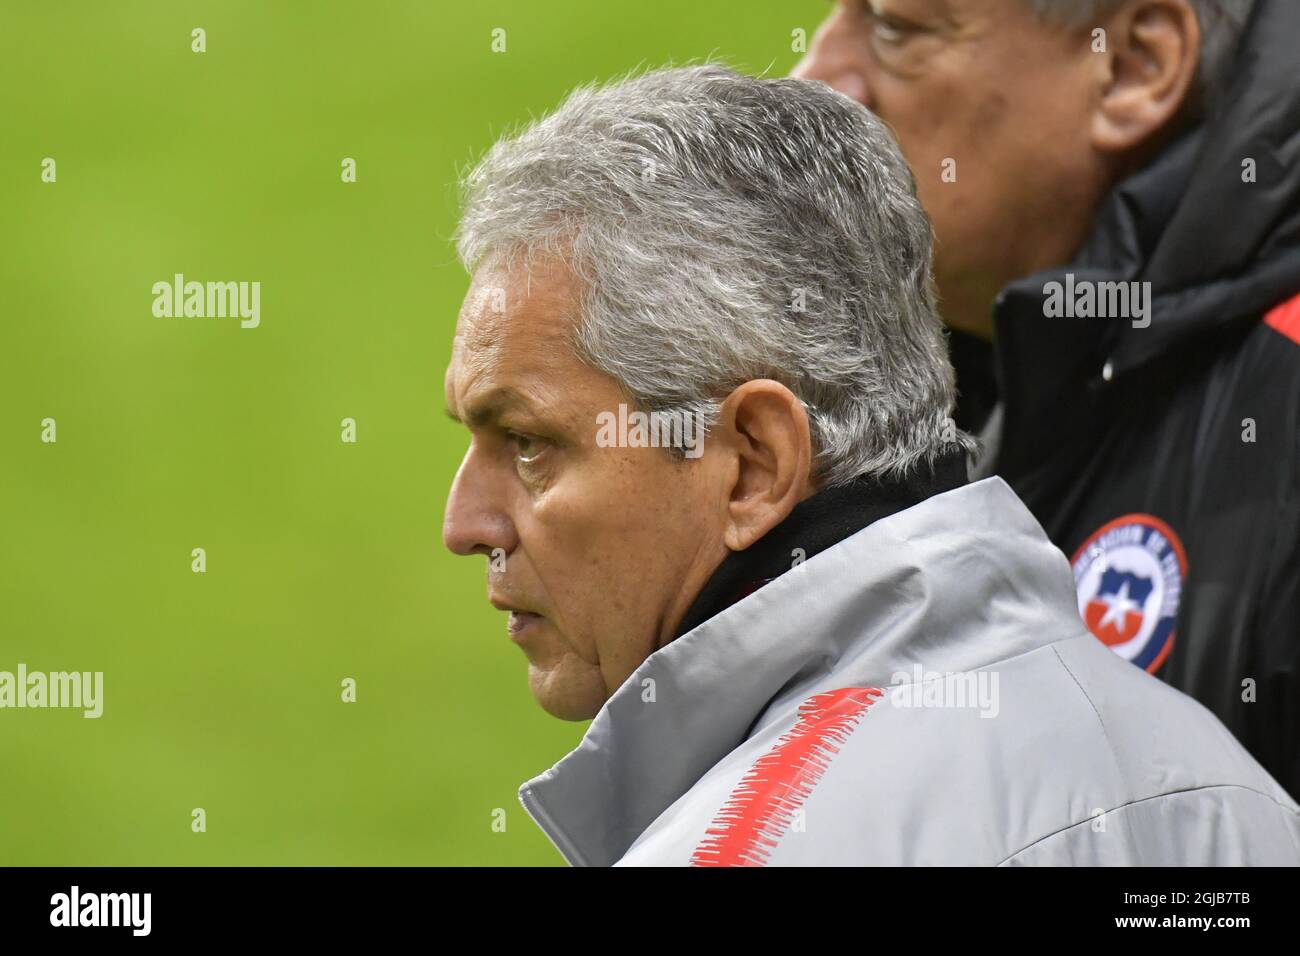 Chile's national soccer team coach Reinaldo Rueda looks on during a training session at Friends Arena in Stockholm, Sweden, on March 23, 2018. Chile will meet Sweden for a friendly game tomorrow, March 24. Photo: Jonas Ekstromer / TT / code 10030  Stock Photo